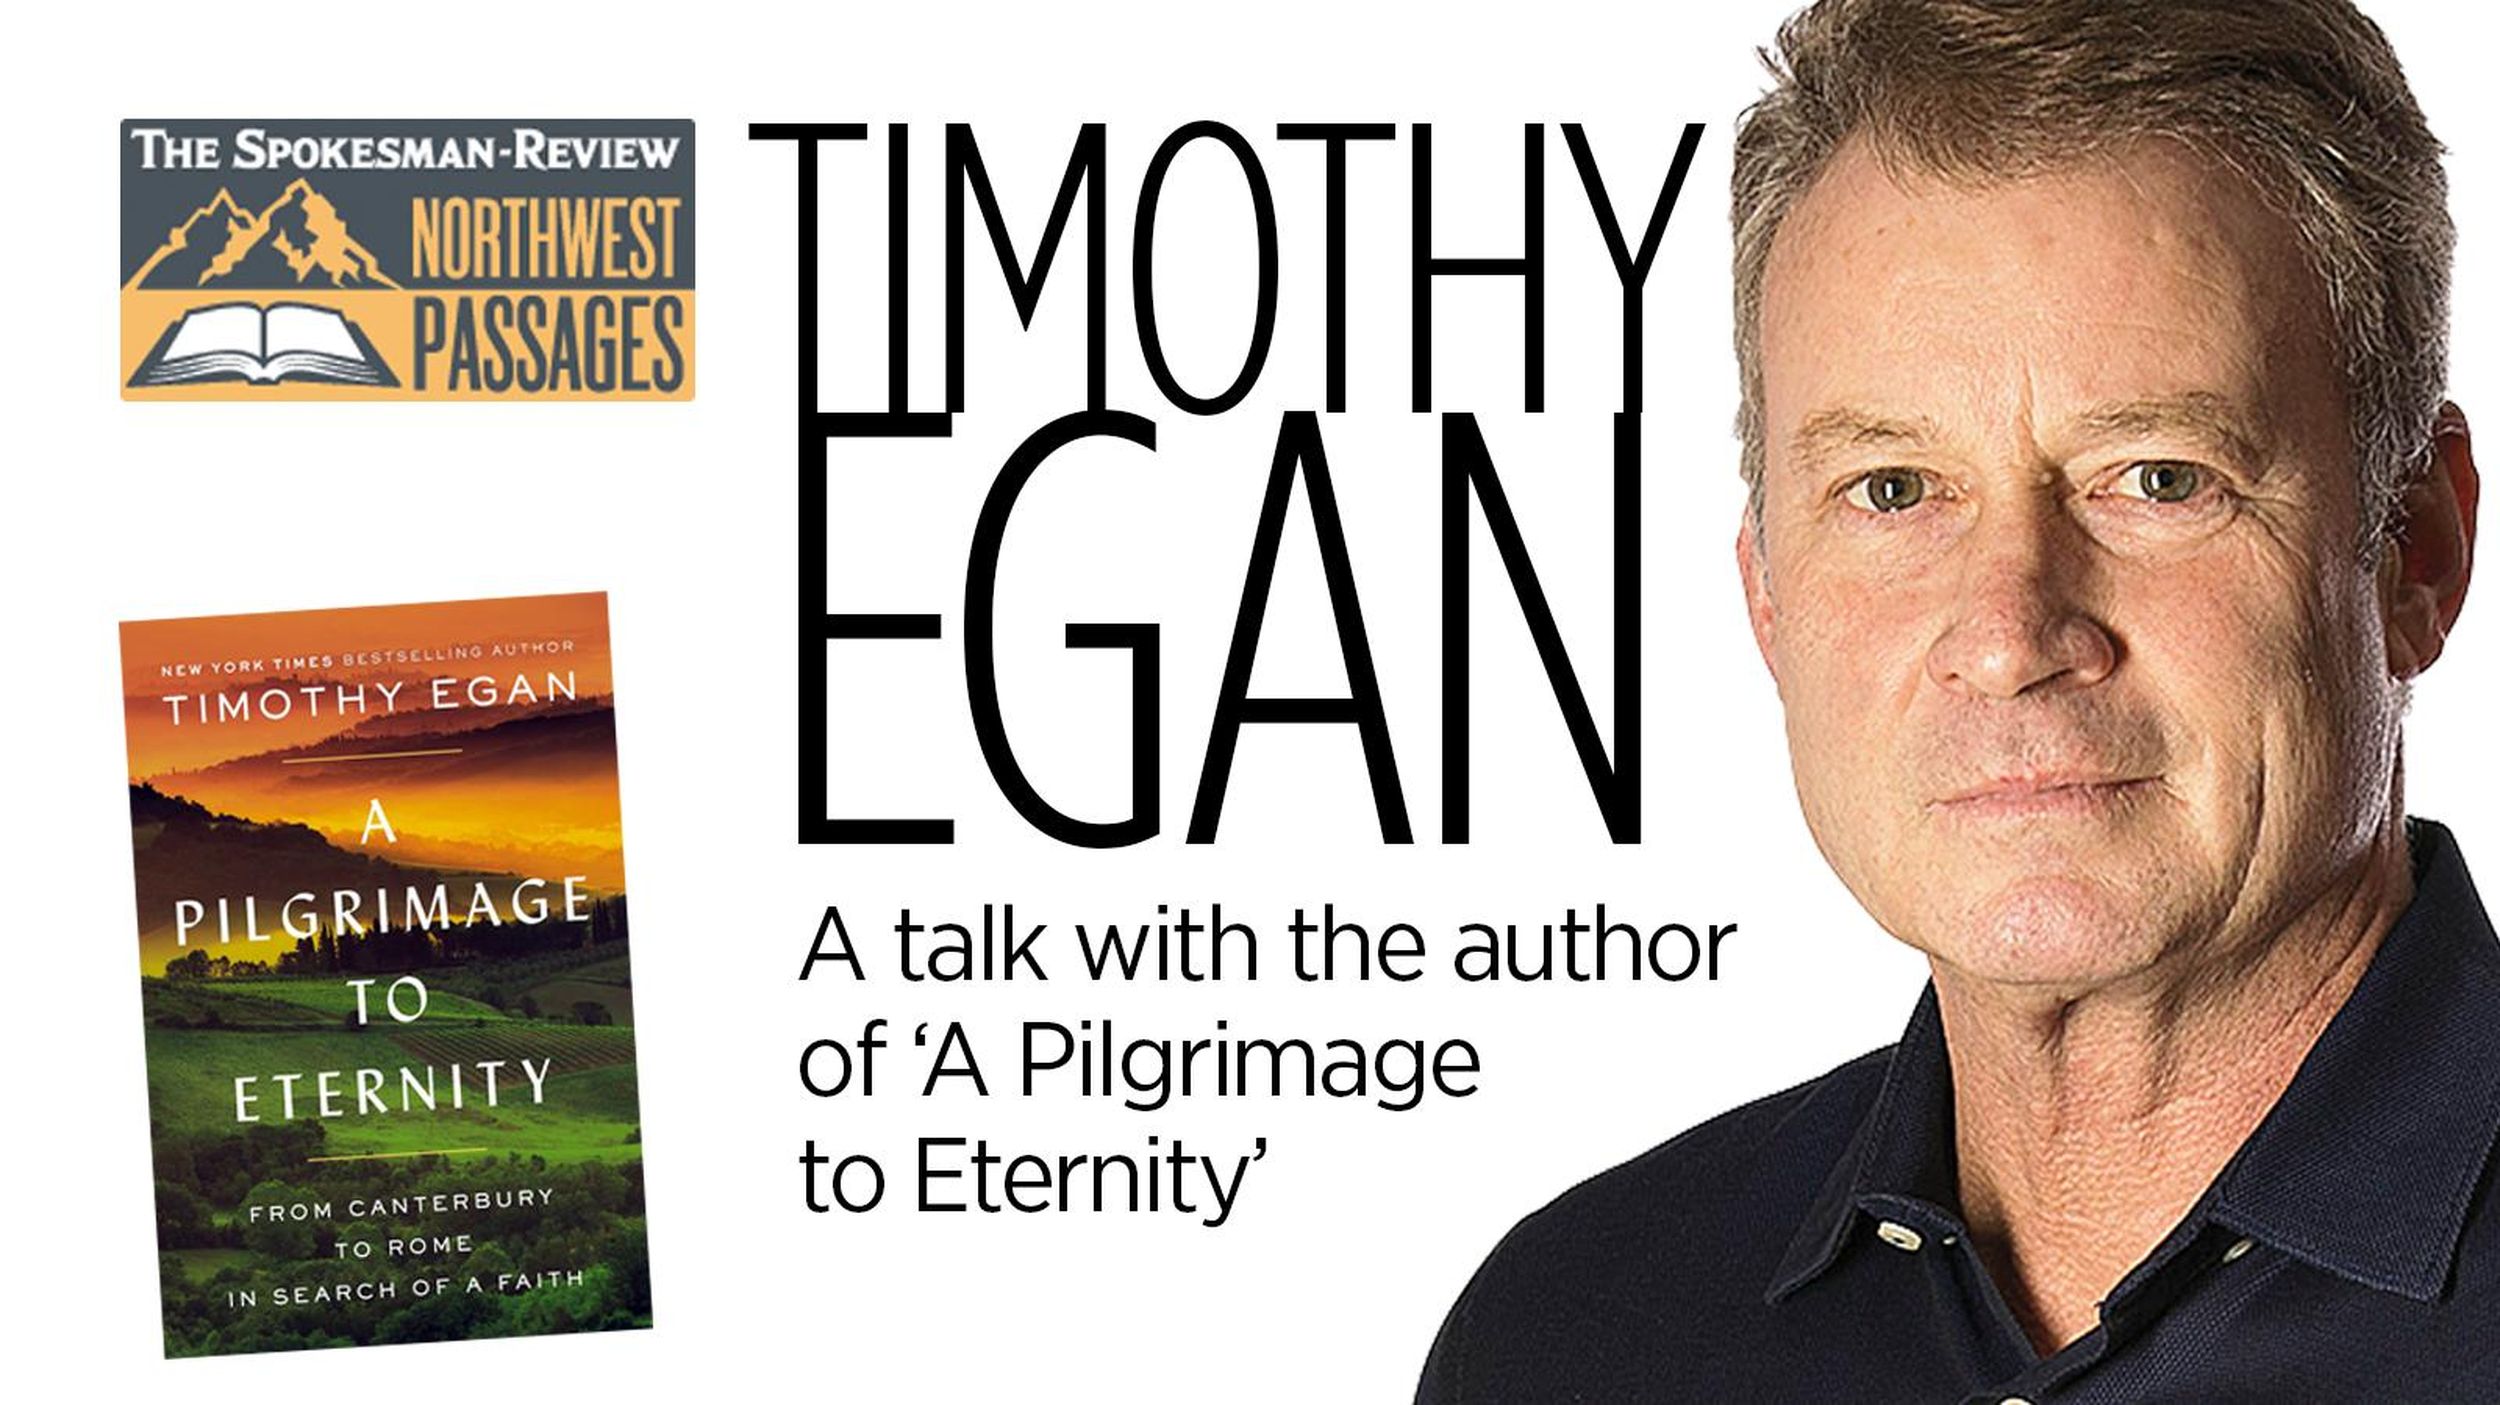 Author and Pulitzer Prize winner Timothy Egan: 'My faith is complicated